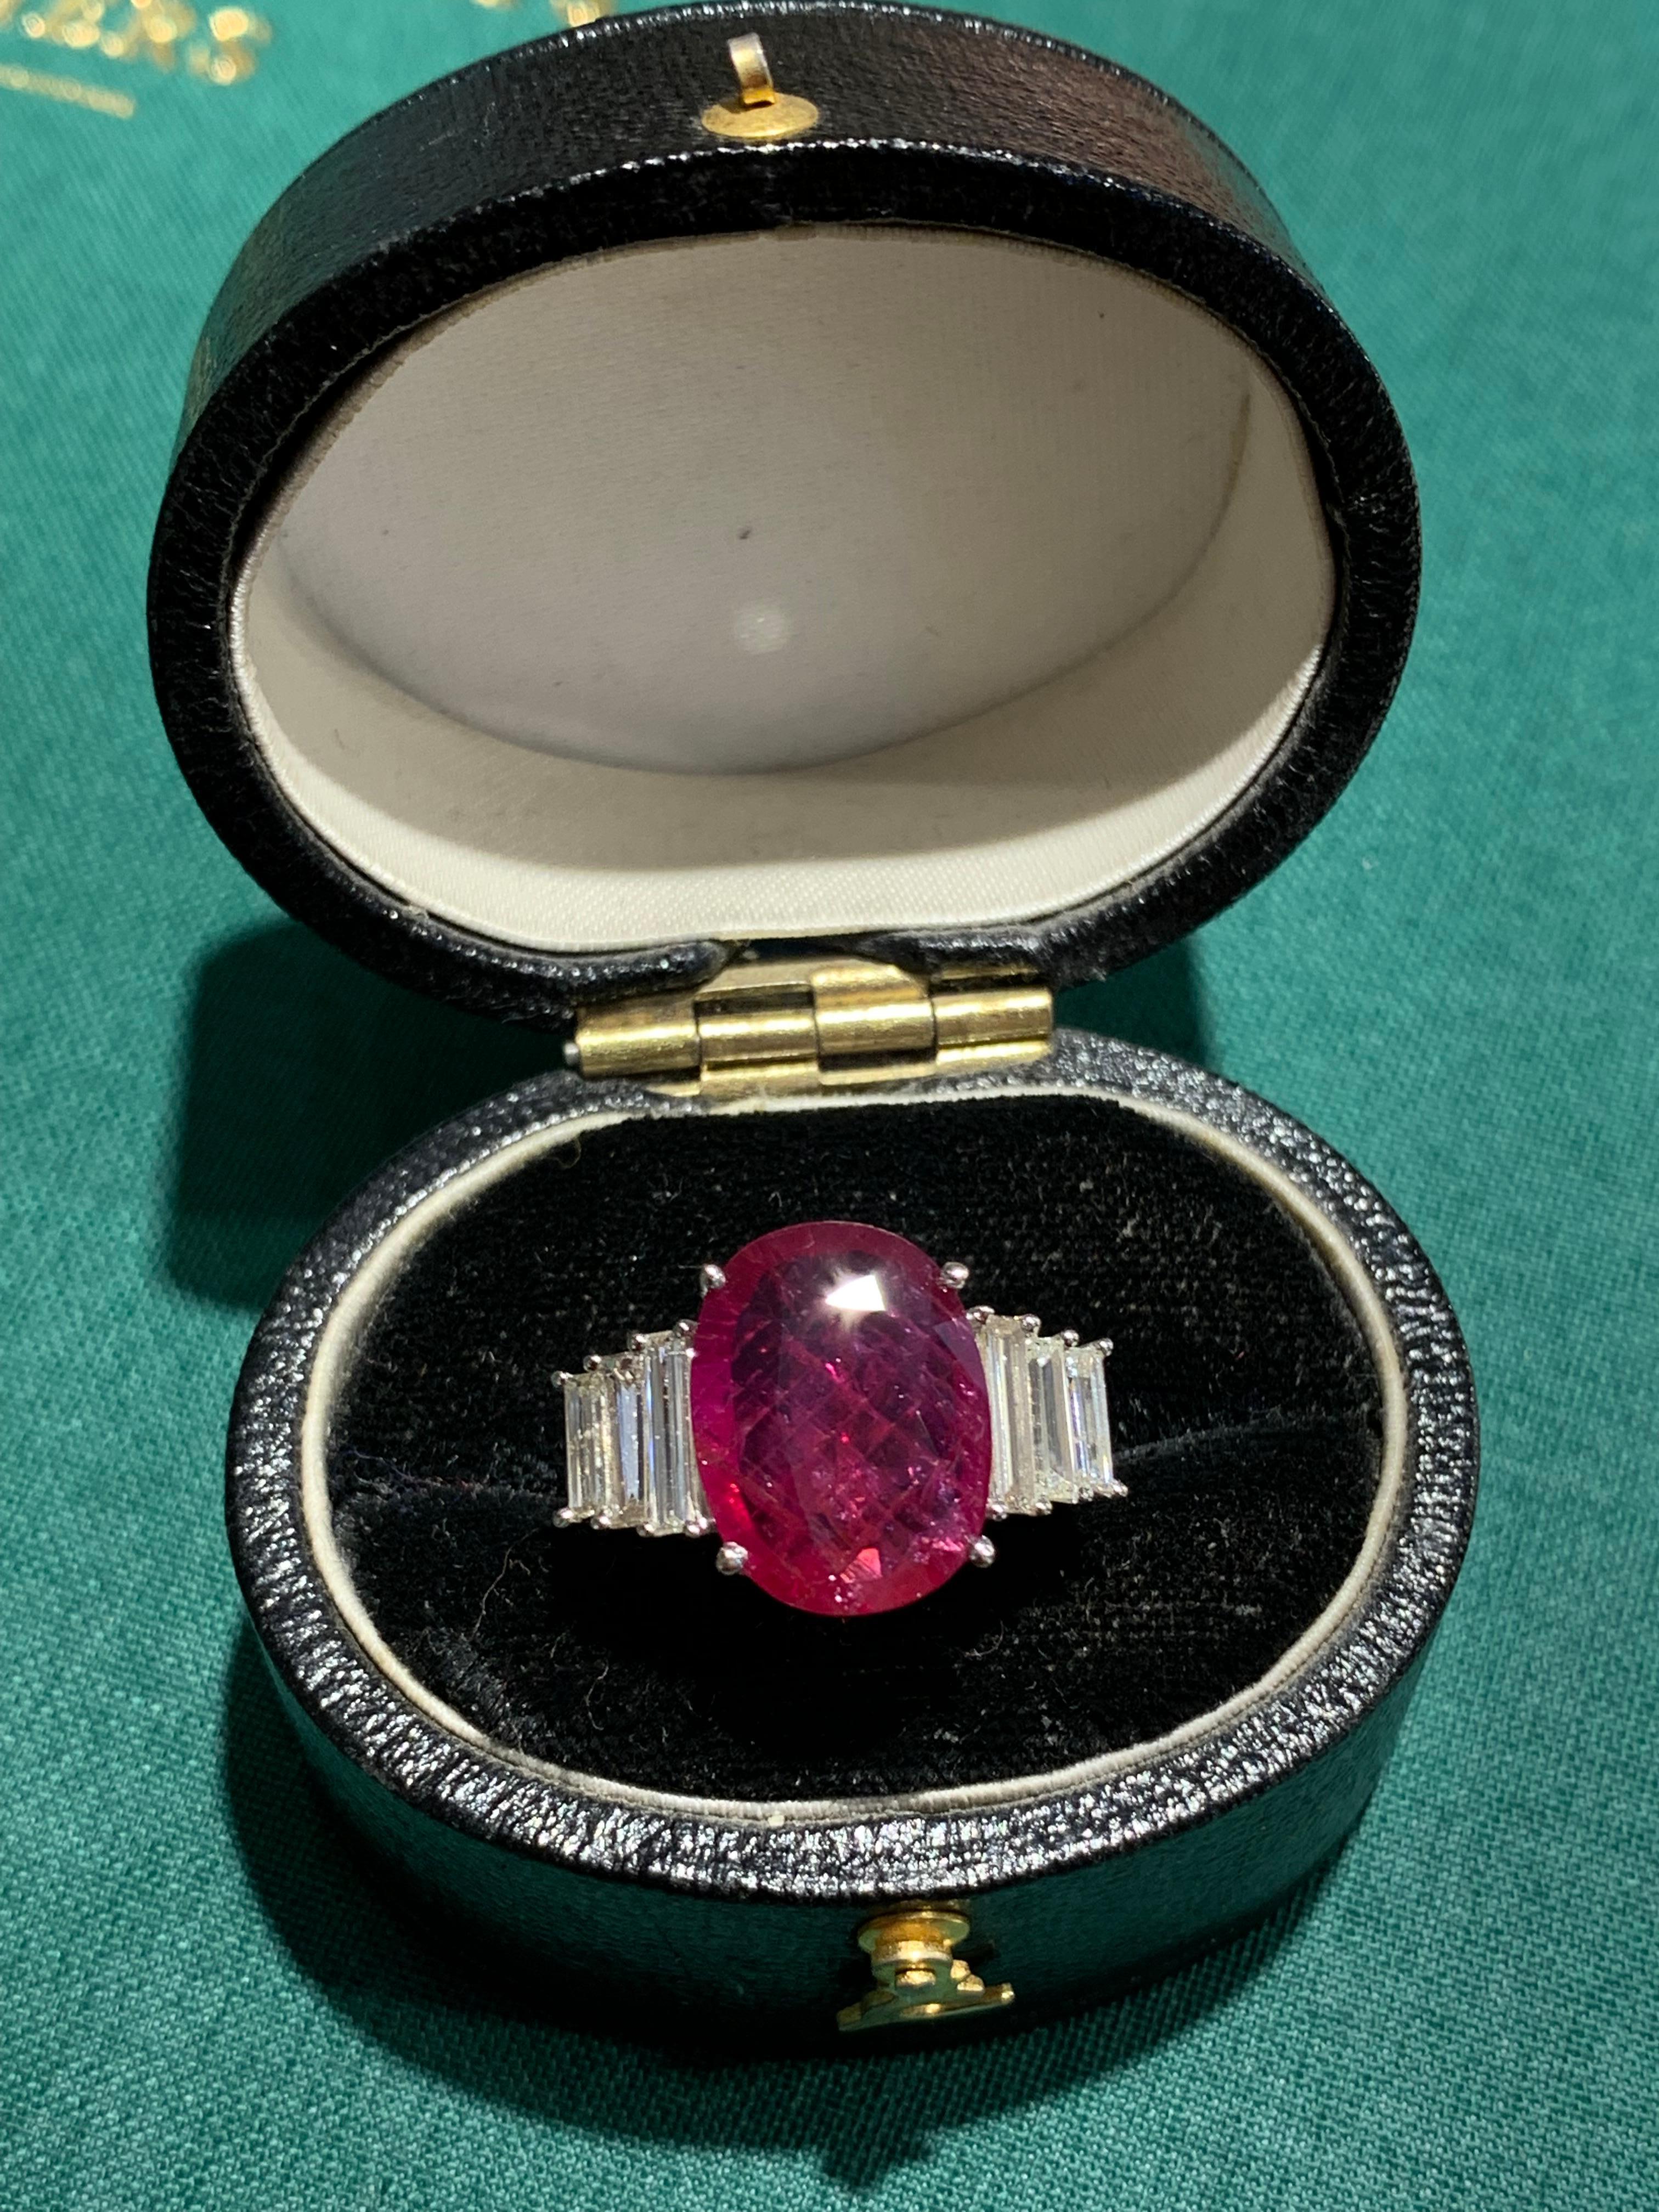 Art Deco Ring Set with a Ruby Surrounded by Baguette Cut Diamonds